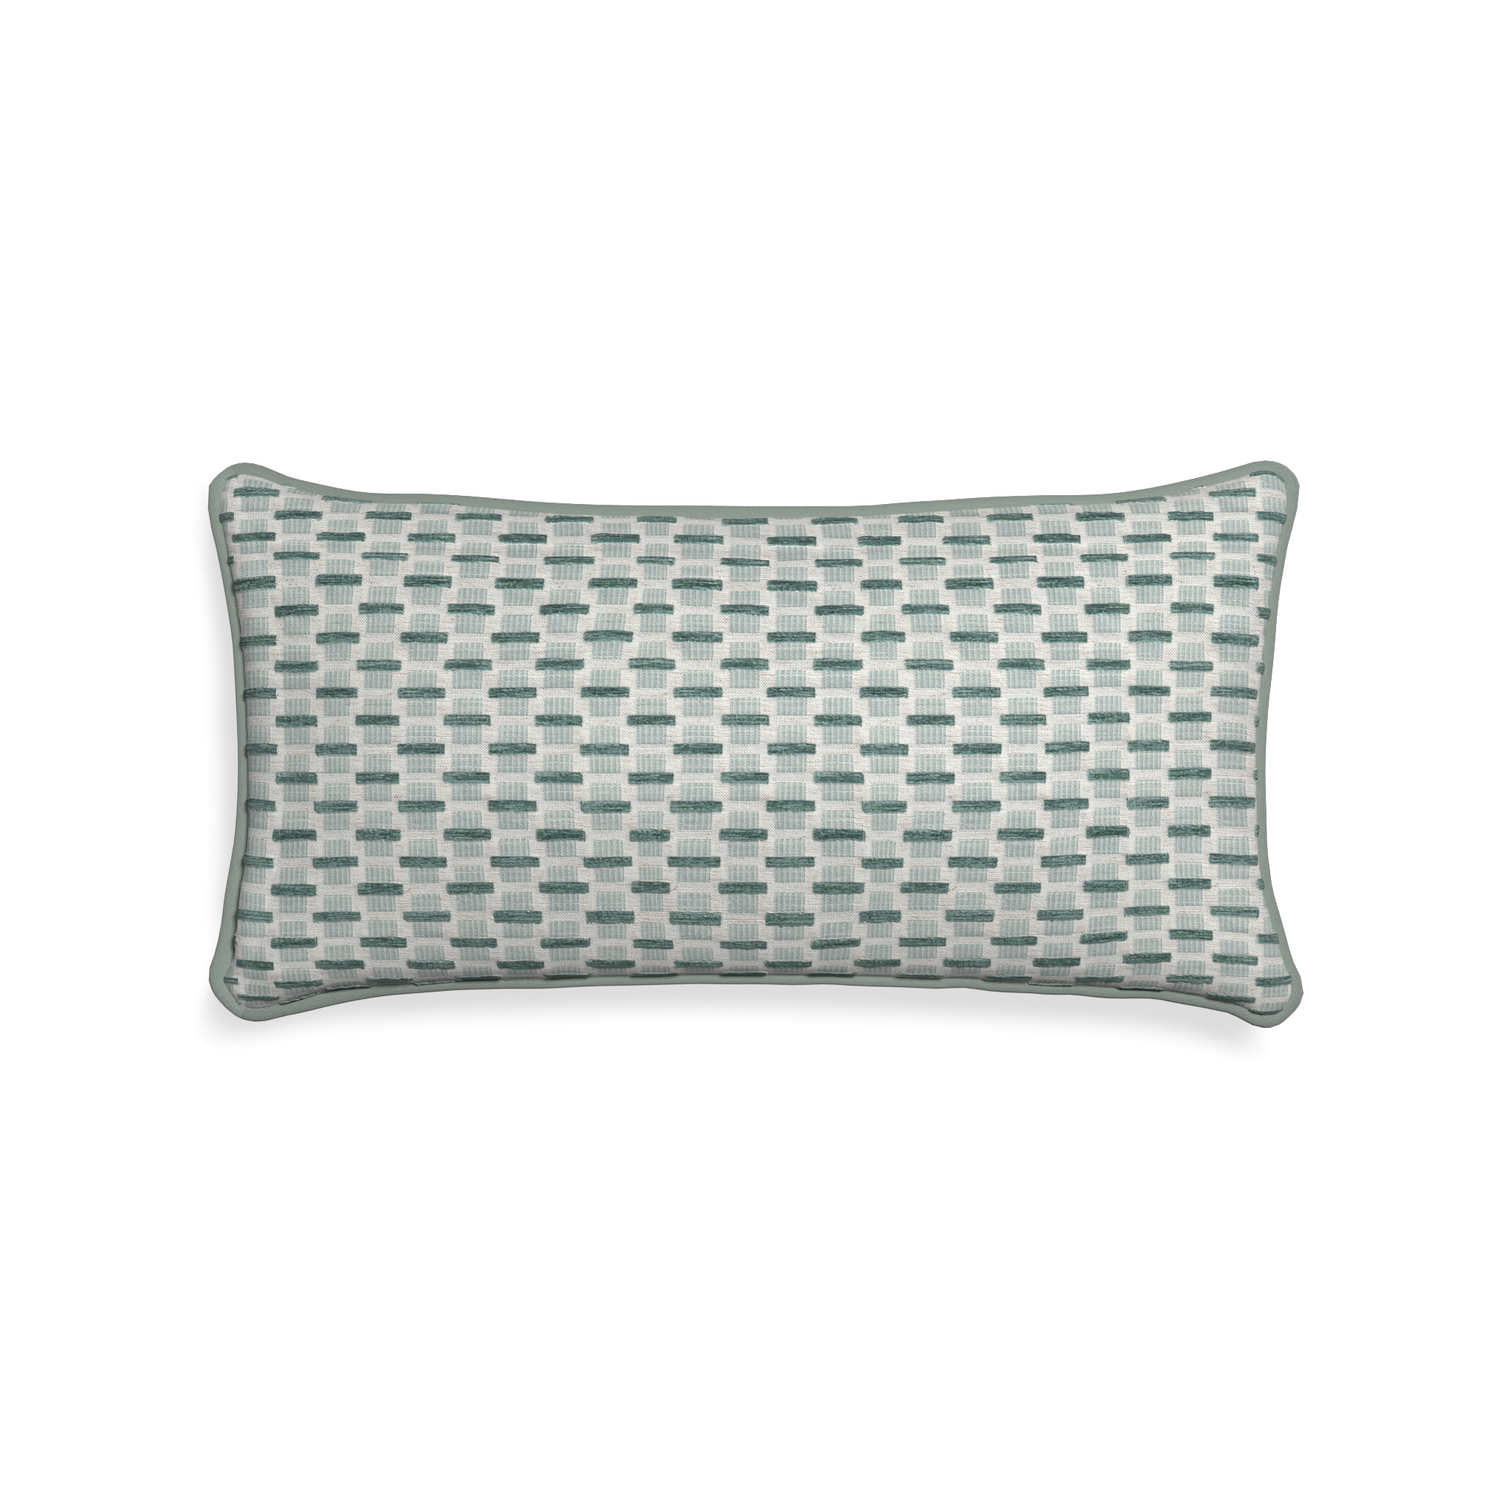 Midi-lumbar willow mint custom green geometric chenillepillow with sage piping on white background